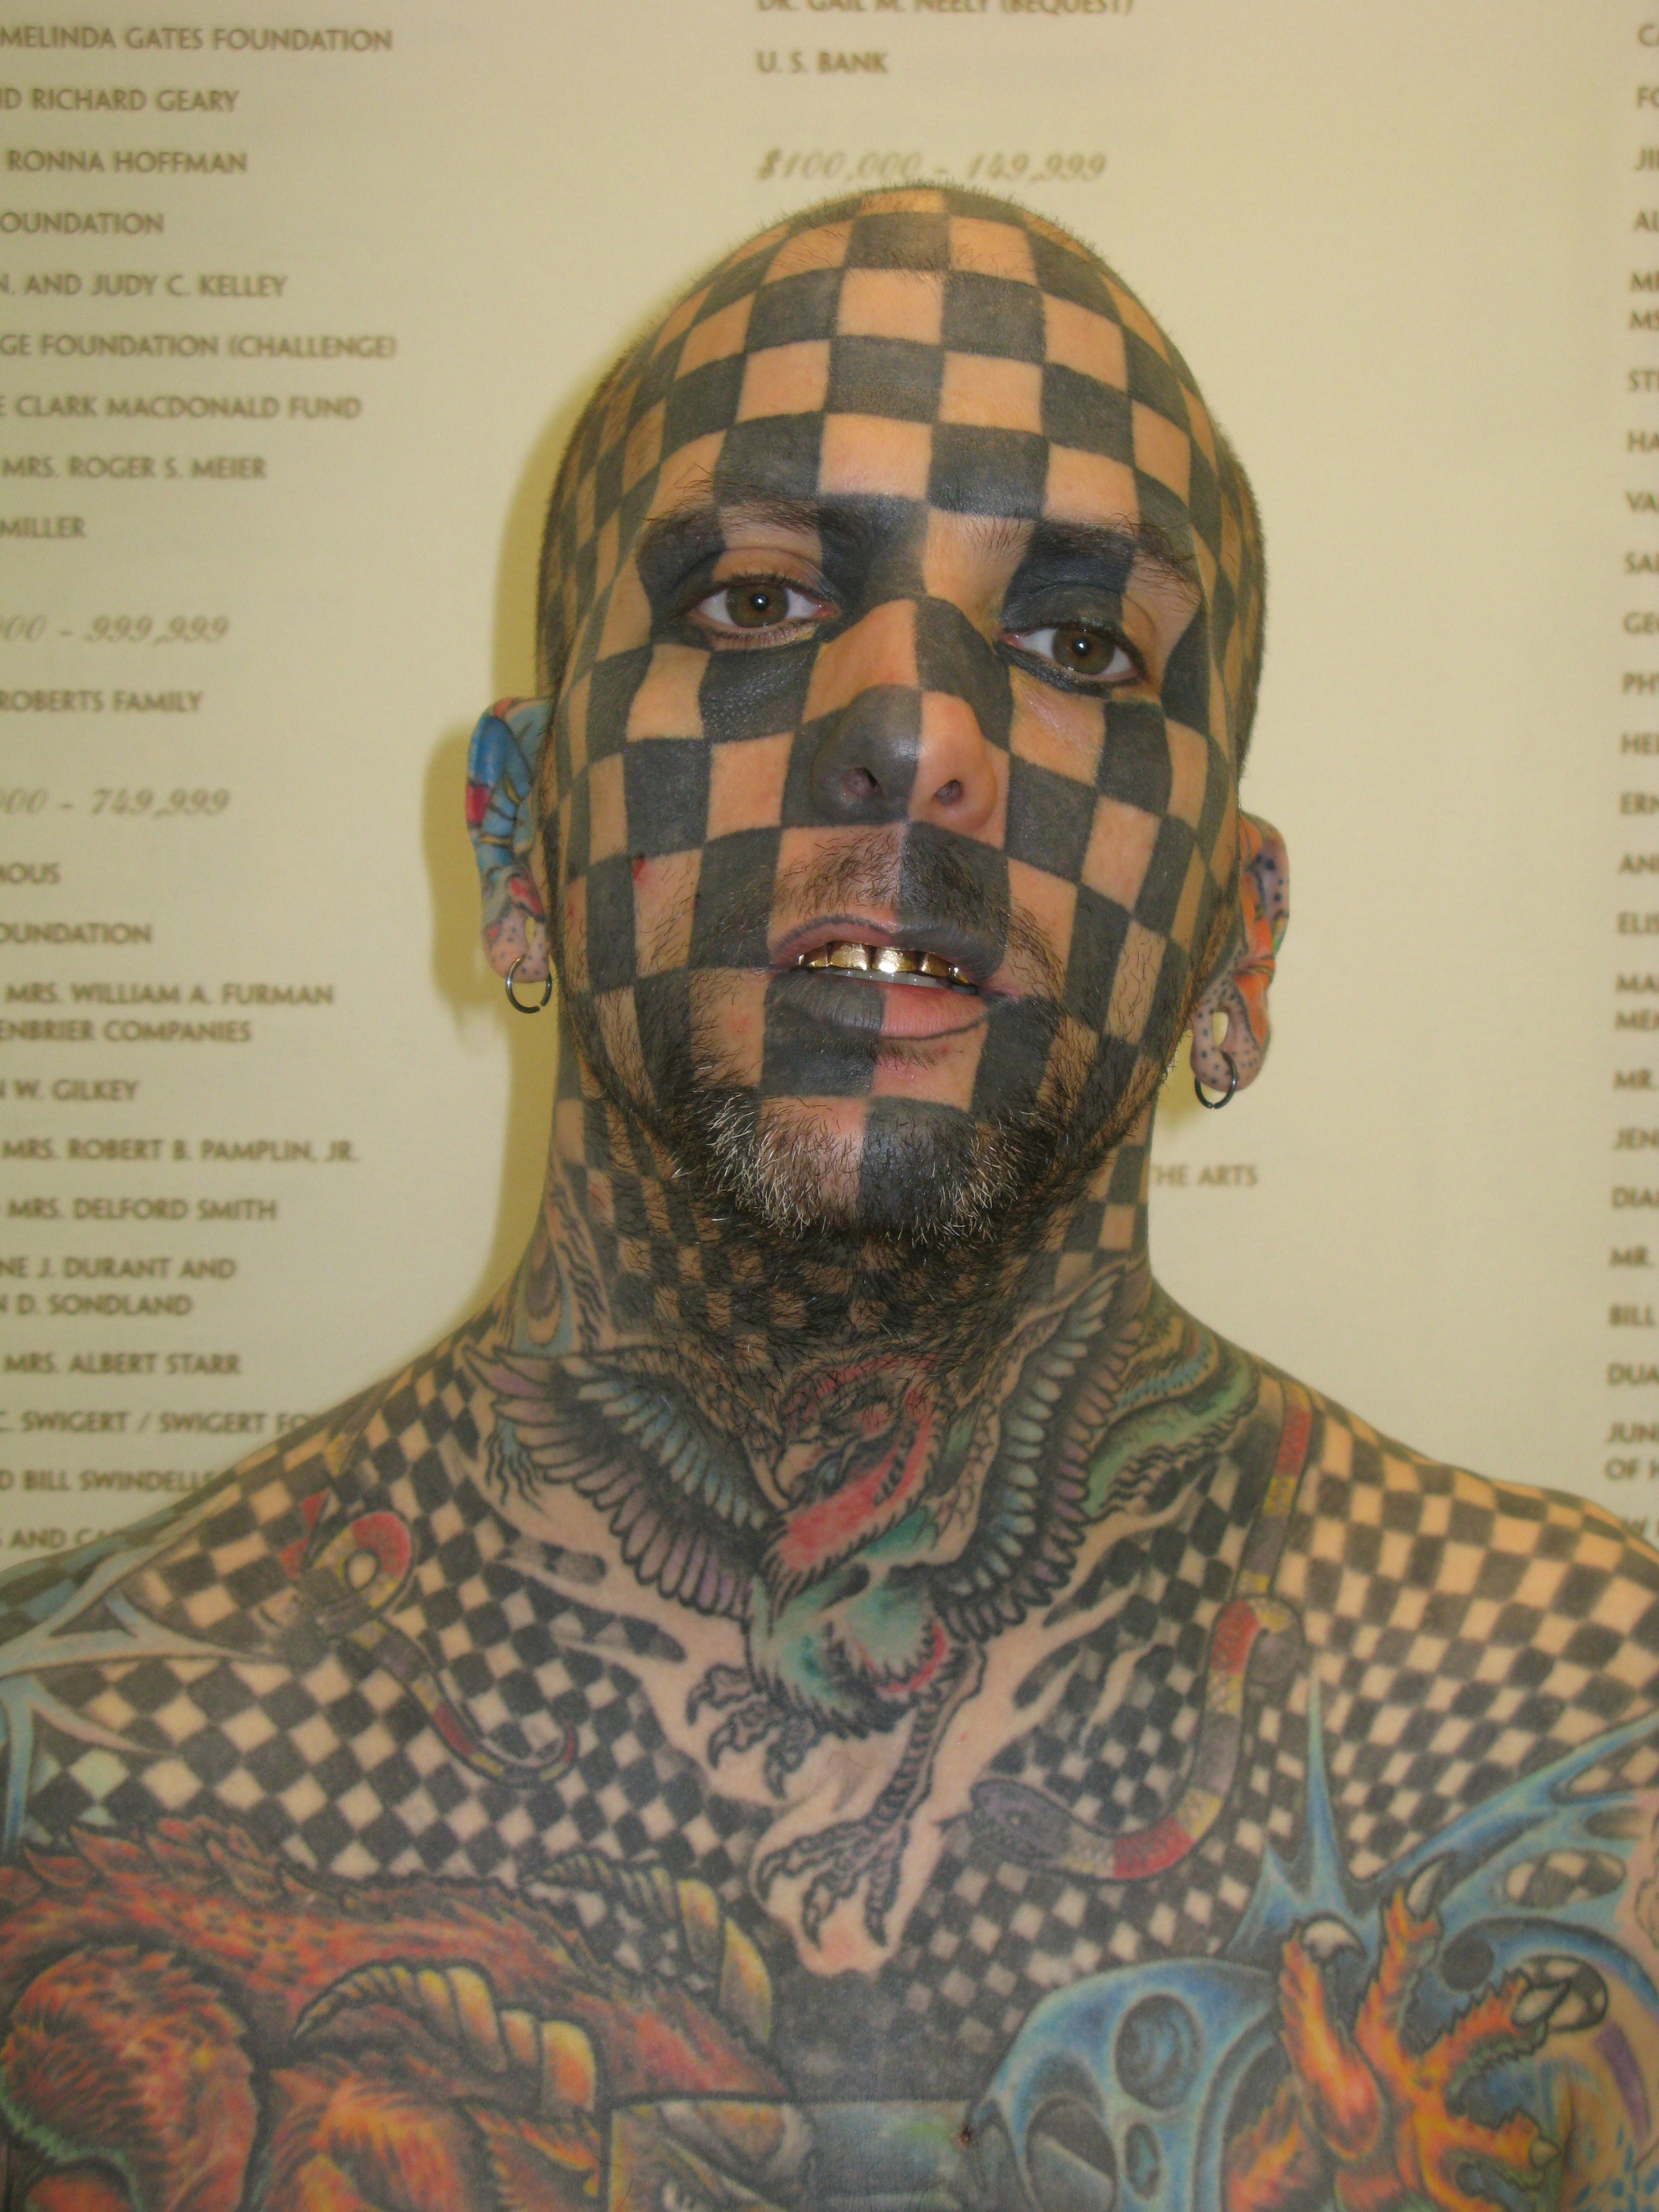  2010, Man in Portland at a tatoo art show. &nbsp;I asked if I could take a few photos of him and he agreed. 